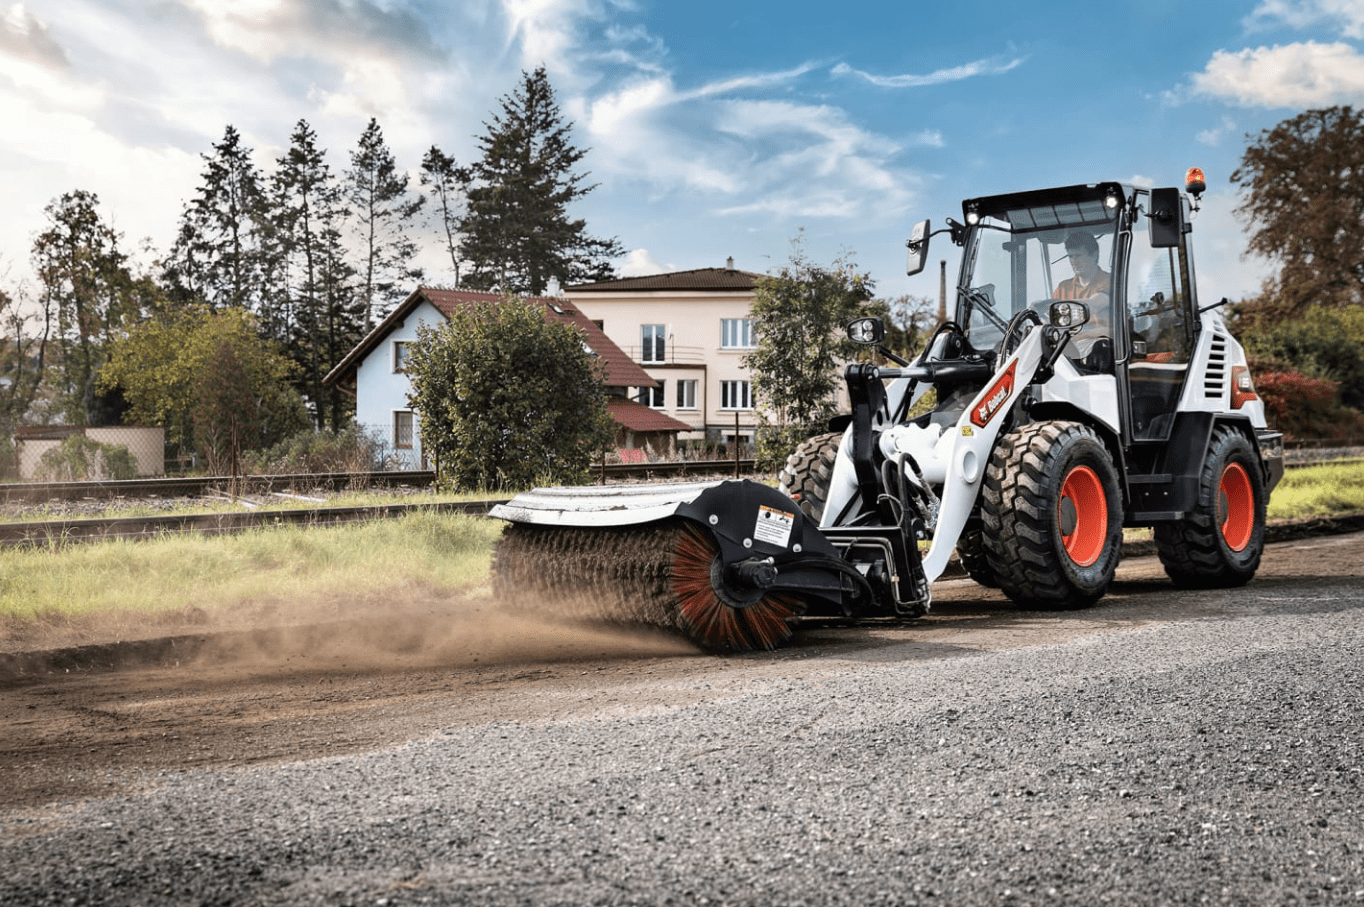 Browse Specs and more for the L85 Compact Wheel Loader - Bobcat of the Rockies